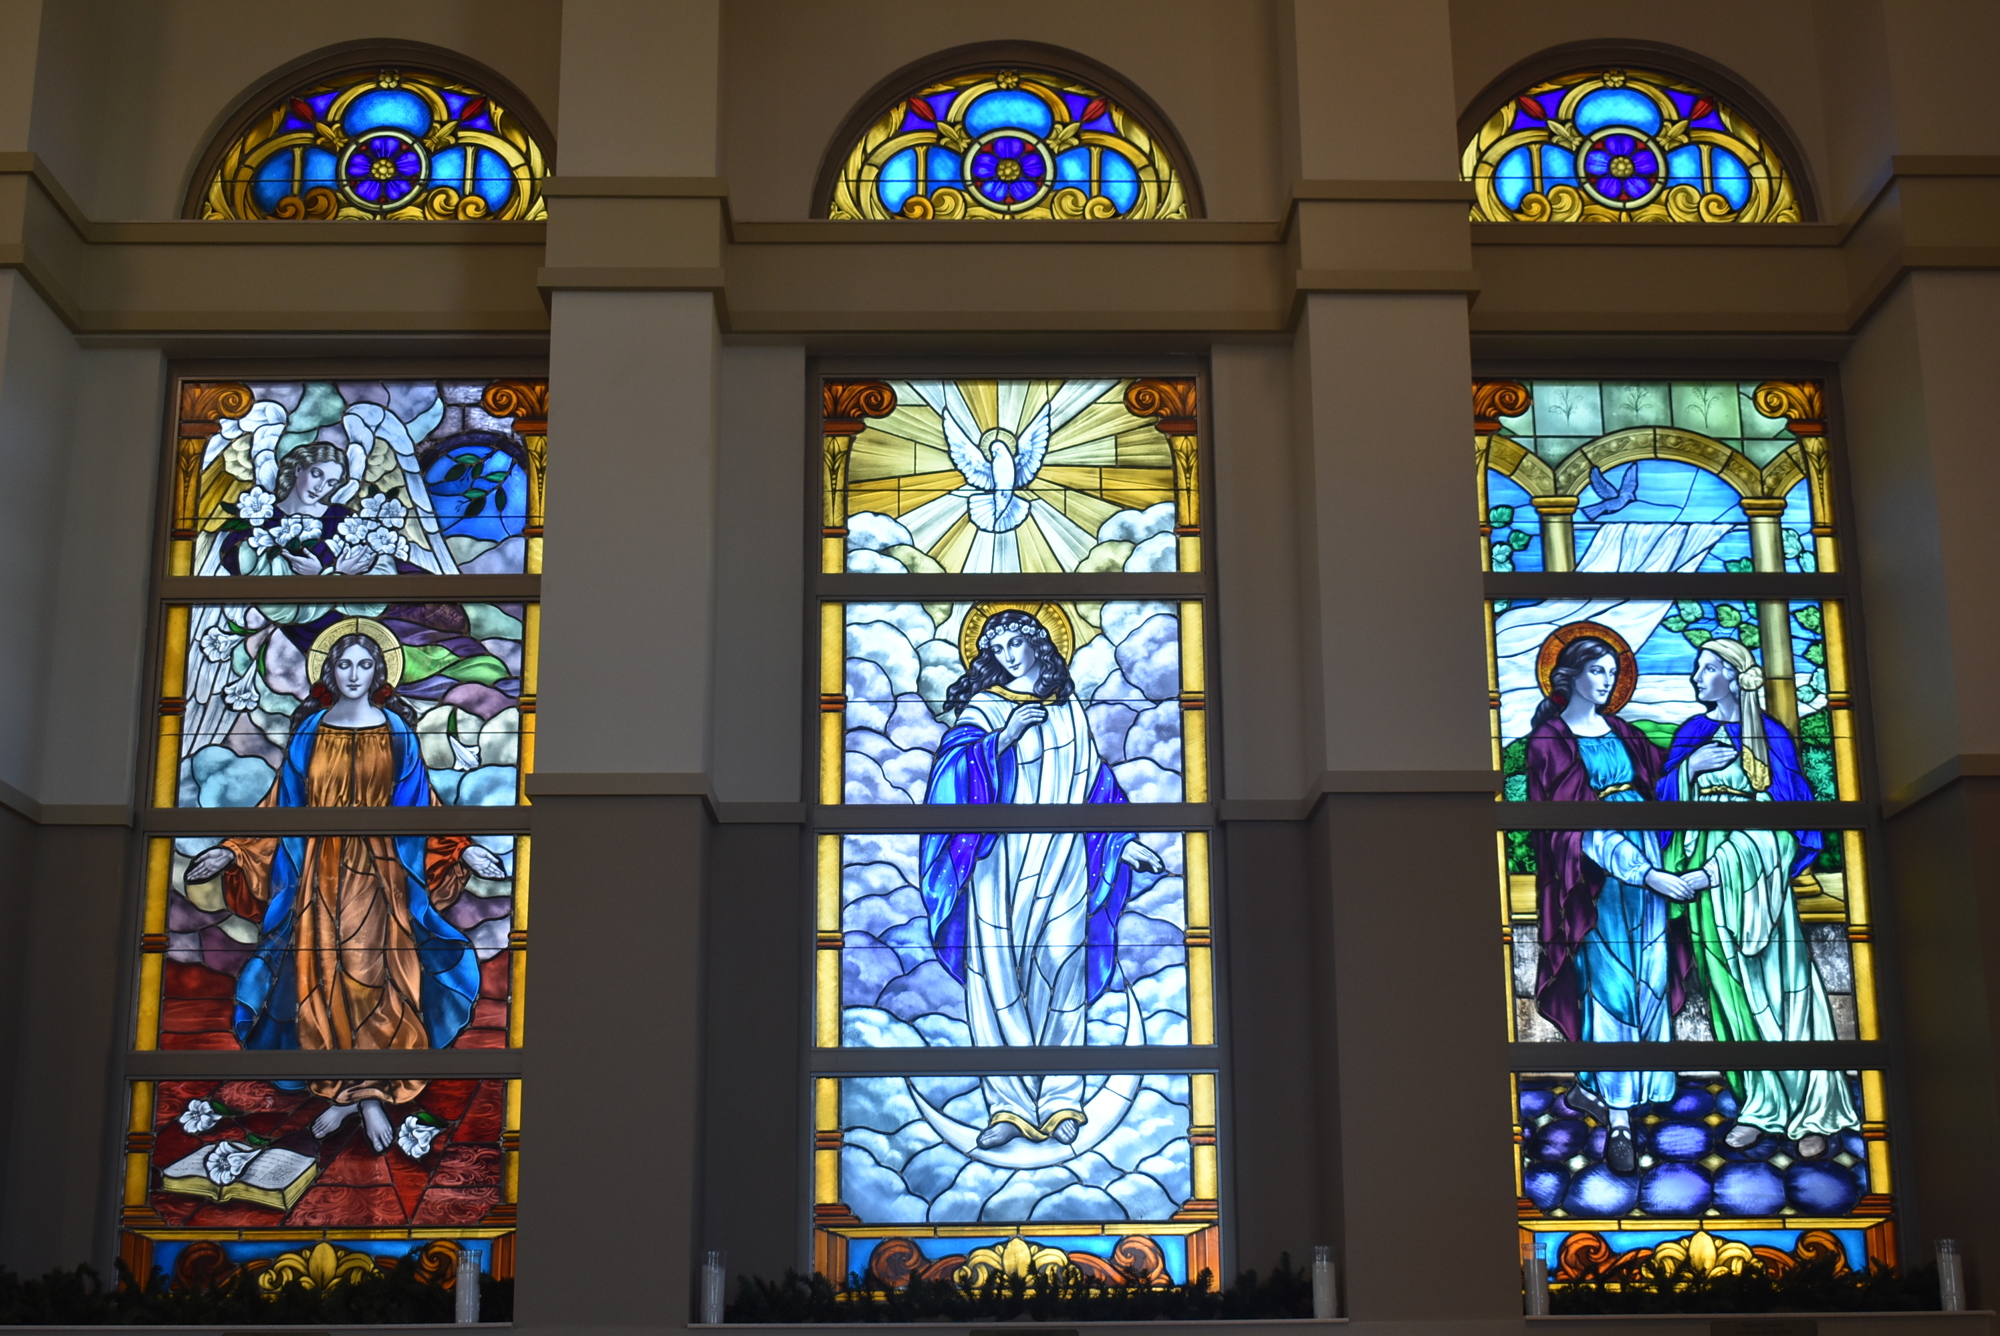 These stained glass windows, installed at Our Lady of the Angels in 2020, depict the annunciation from the angel Gabriel to Mary, the assumption of Mary into Heaven and the visitation of Mary to St. Elizabeth.